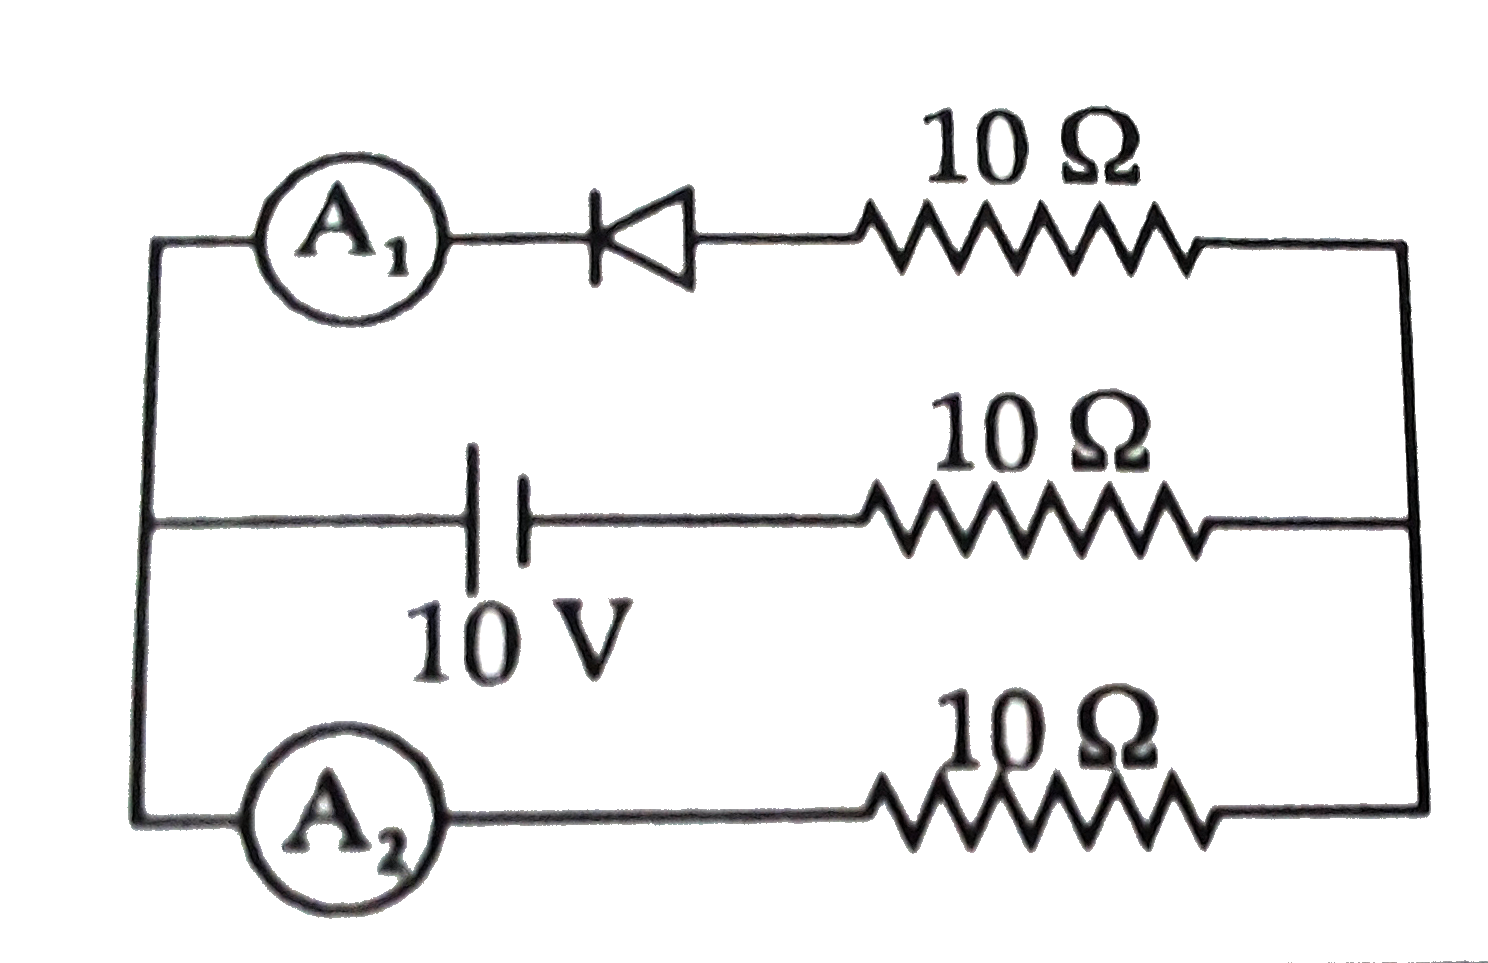 In the figure shown the readings of the ammeters A(1) and A(2) are respectively.